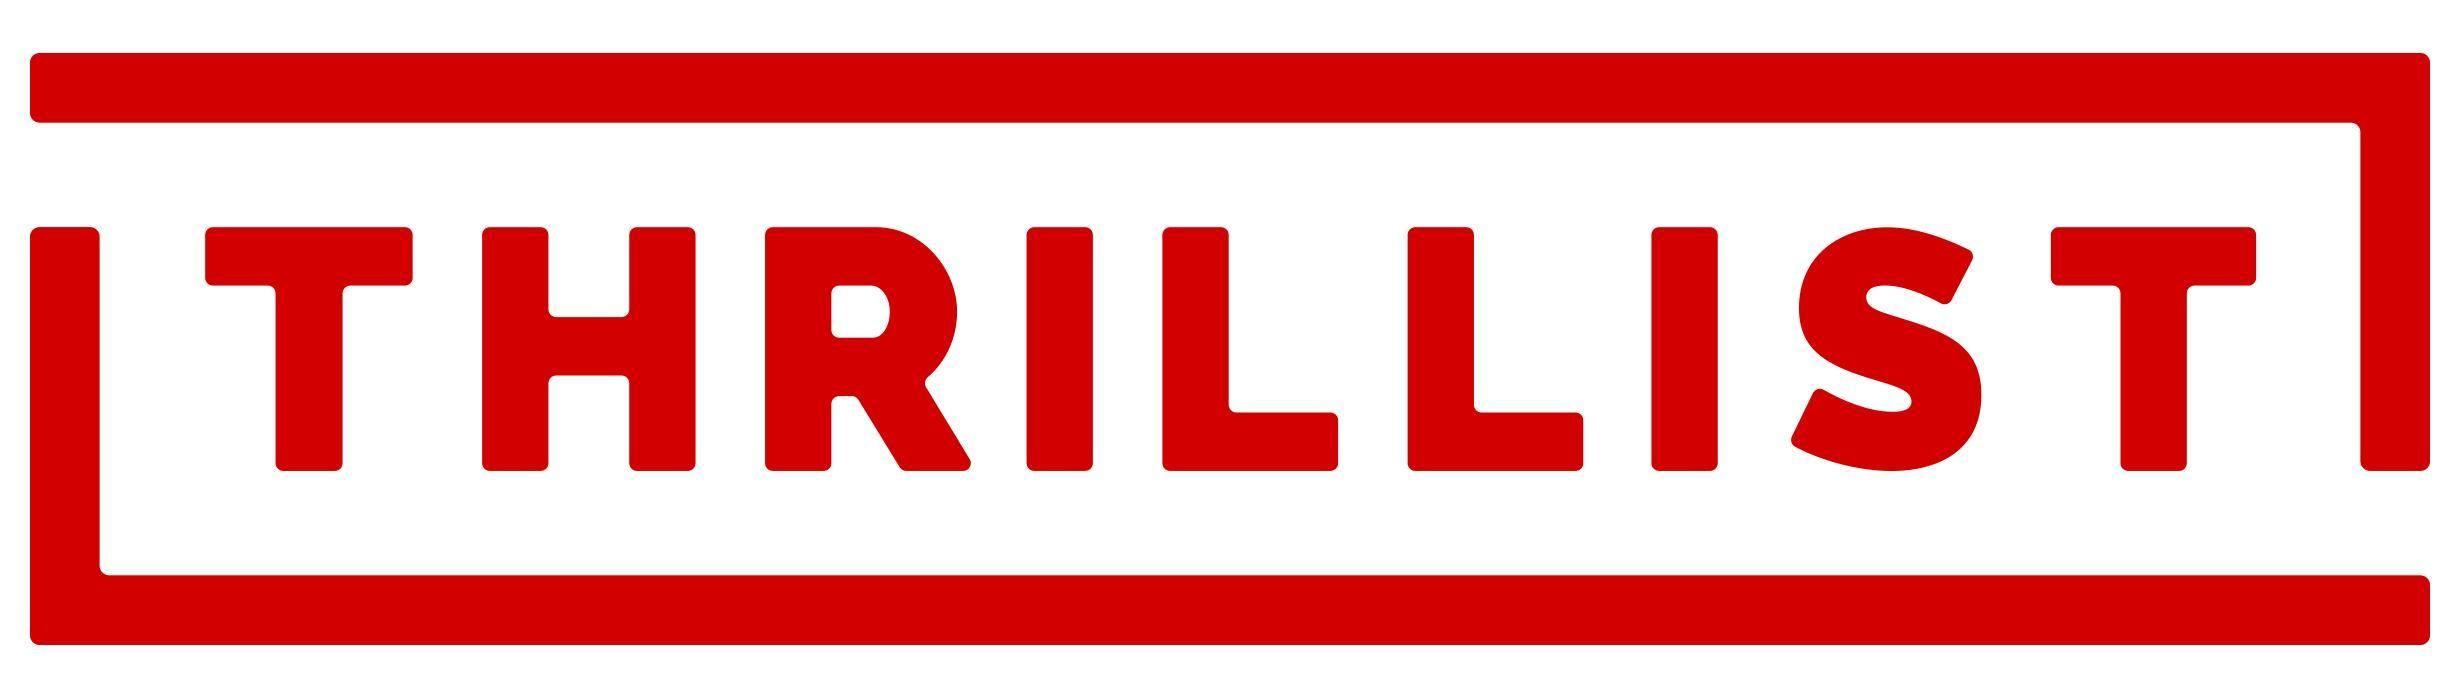 Thrillest Logo - Thrillist Competitors, Revenue and Employees - Owler Company Profile